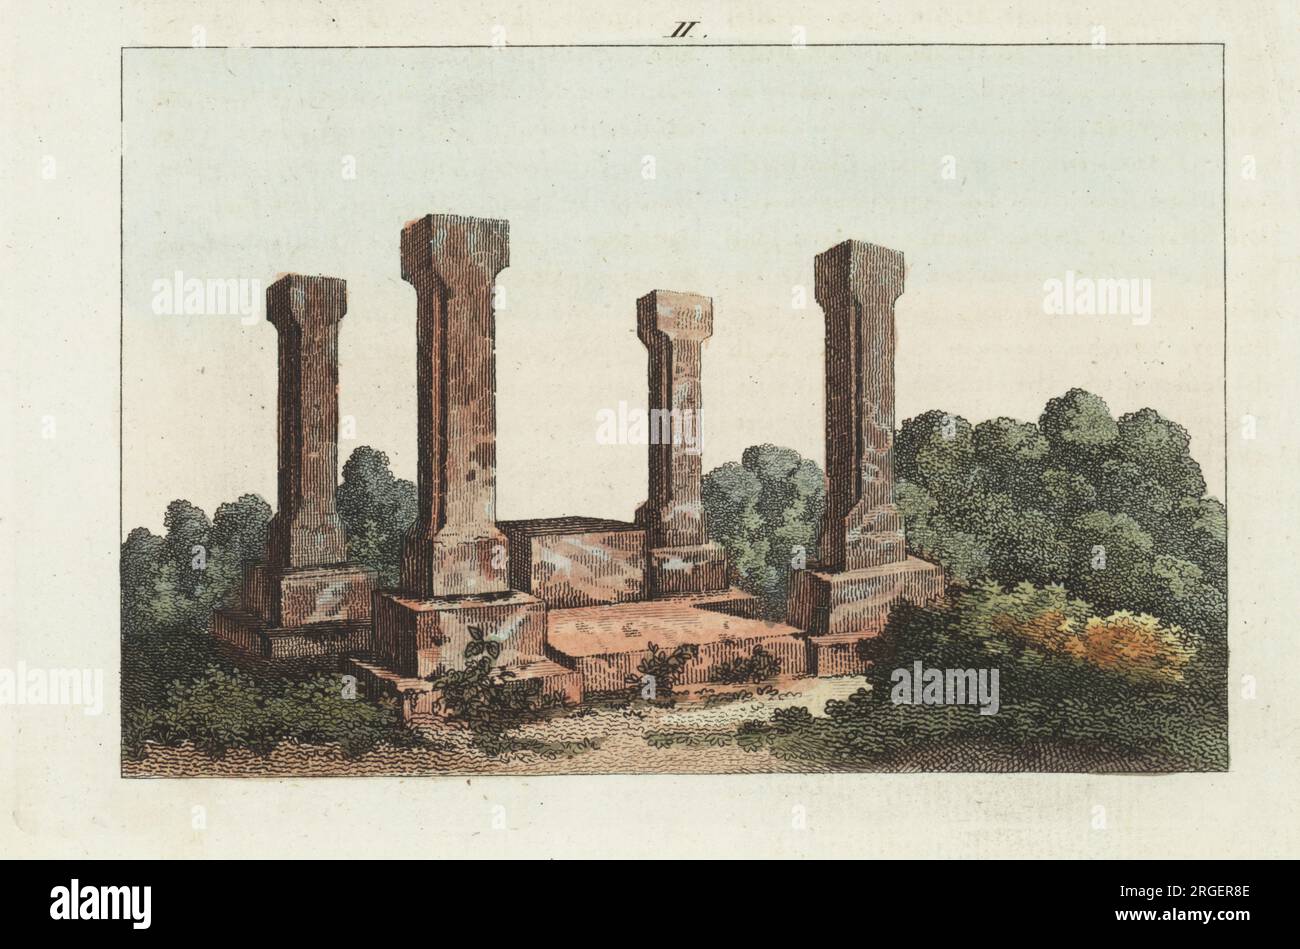 The King's Seat at Axum, Abyssinia (Aksum, Ethiopia). Greek- or Egyptian-style throne with four octagonal stone columns. Erected by Ptolemy III Euergetes according to Scottish explorer James Bruce. Copied from Voyages and Travels by George Annesley, Viscount Valentia, and artist Henry Salt, 1809. Handcoloured copperplate engraving from Carl Bertuch's Bilderbuch fur Kinder (Picture Book for Children), Weimar, 1810. A 12-volume encyclopedia for children illustrated with almost 1,200 engraved plates on natural history, science, costume, mythology, etc., published from 1790-1830. Stock Photo